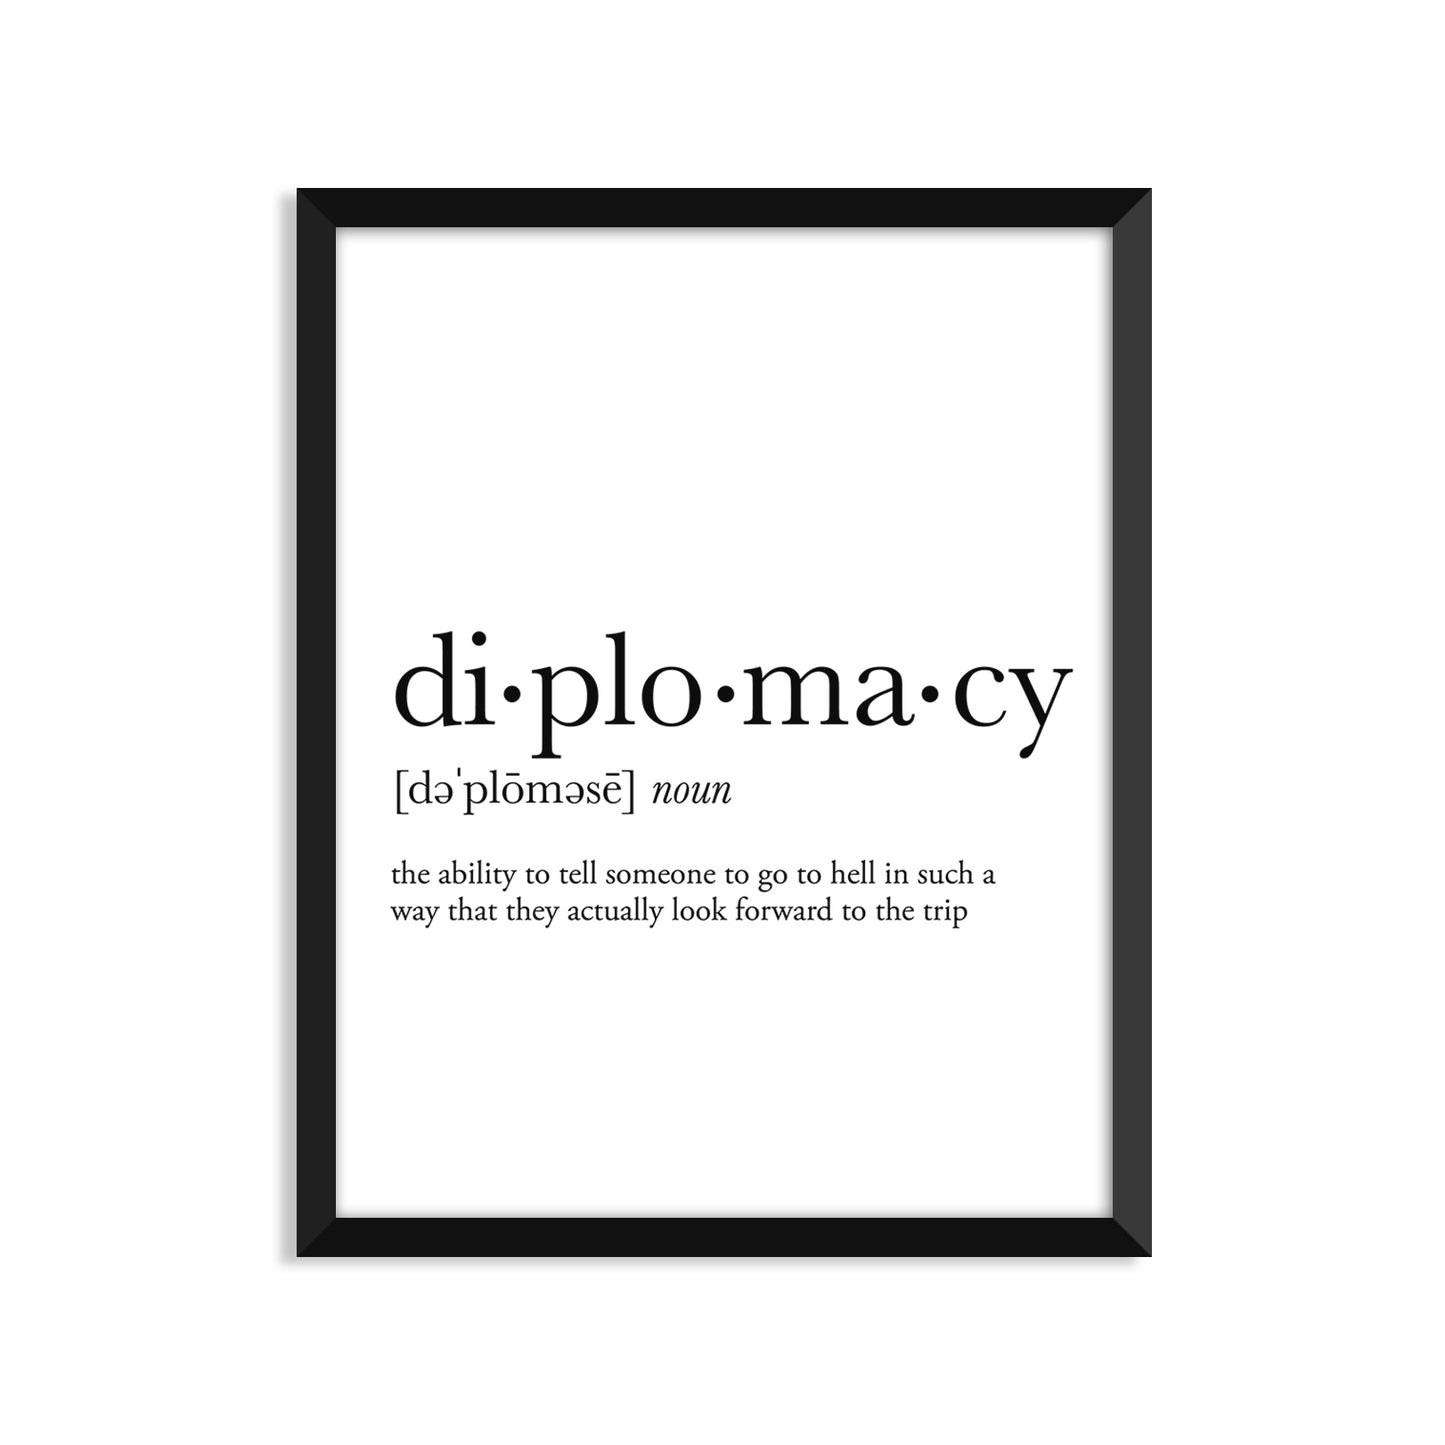 Diplomacy Definition - Unframed Art Print Or Greeting Card